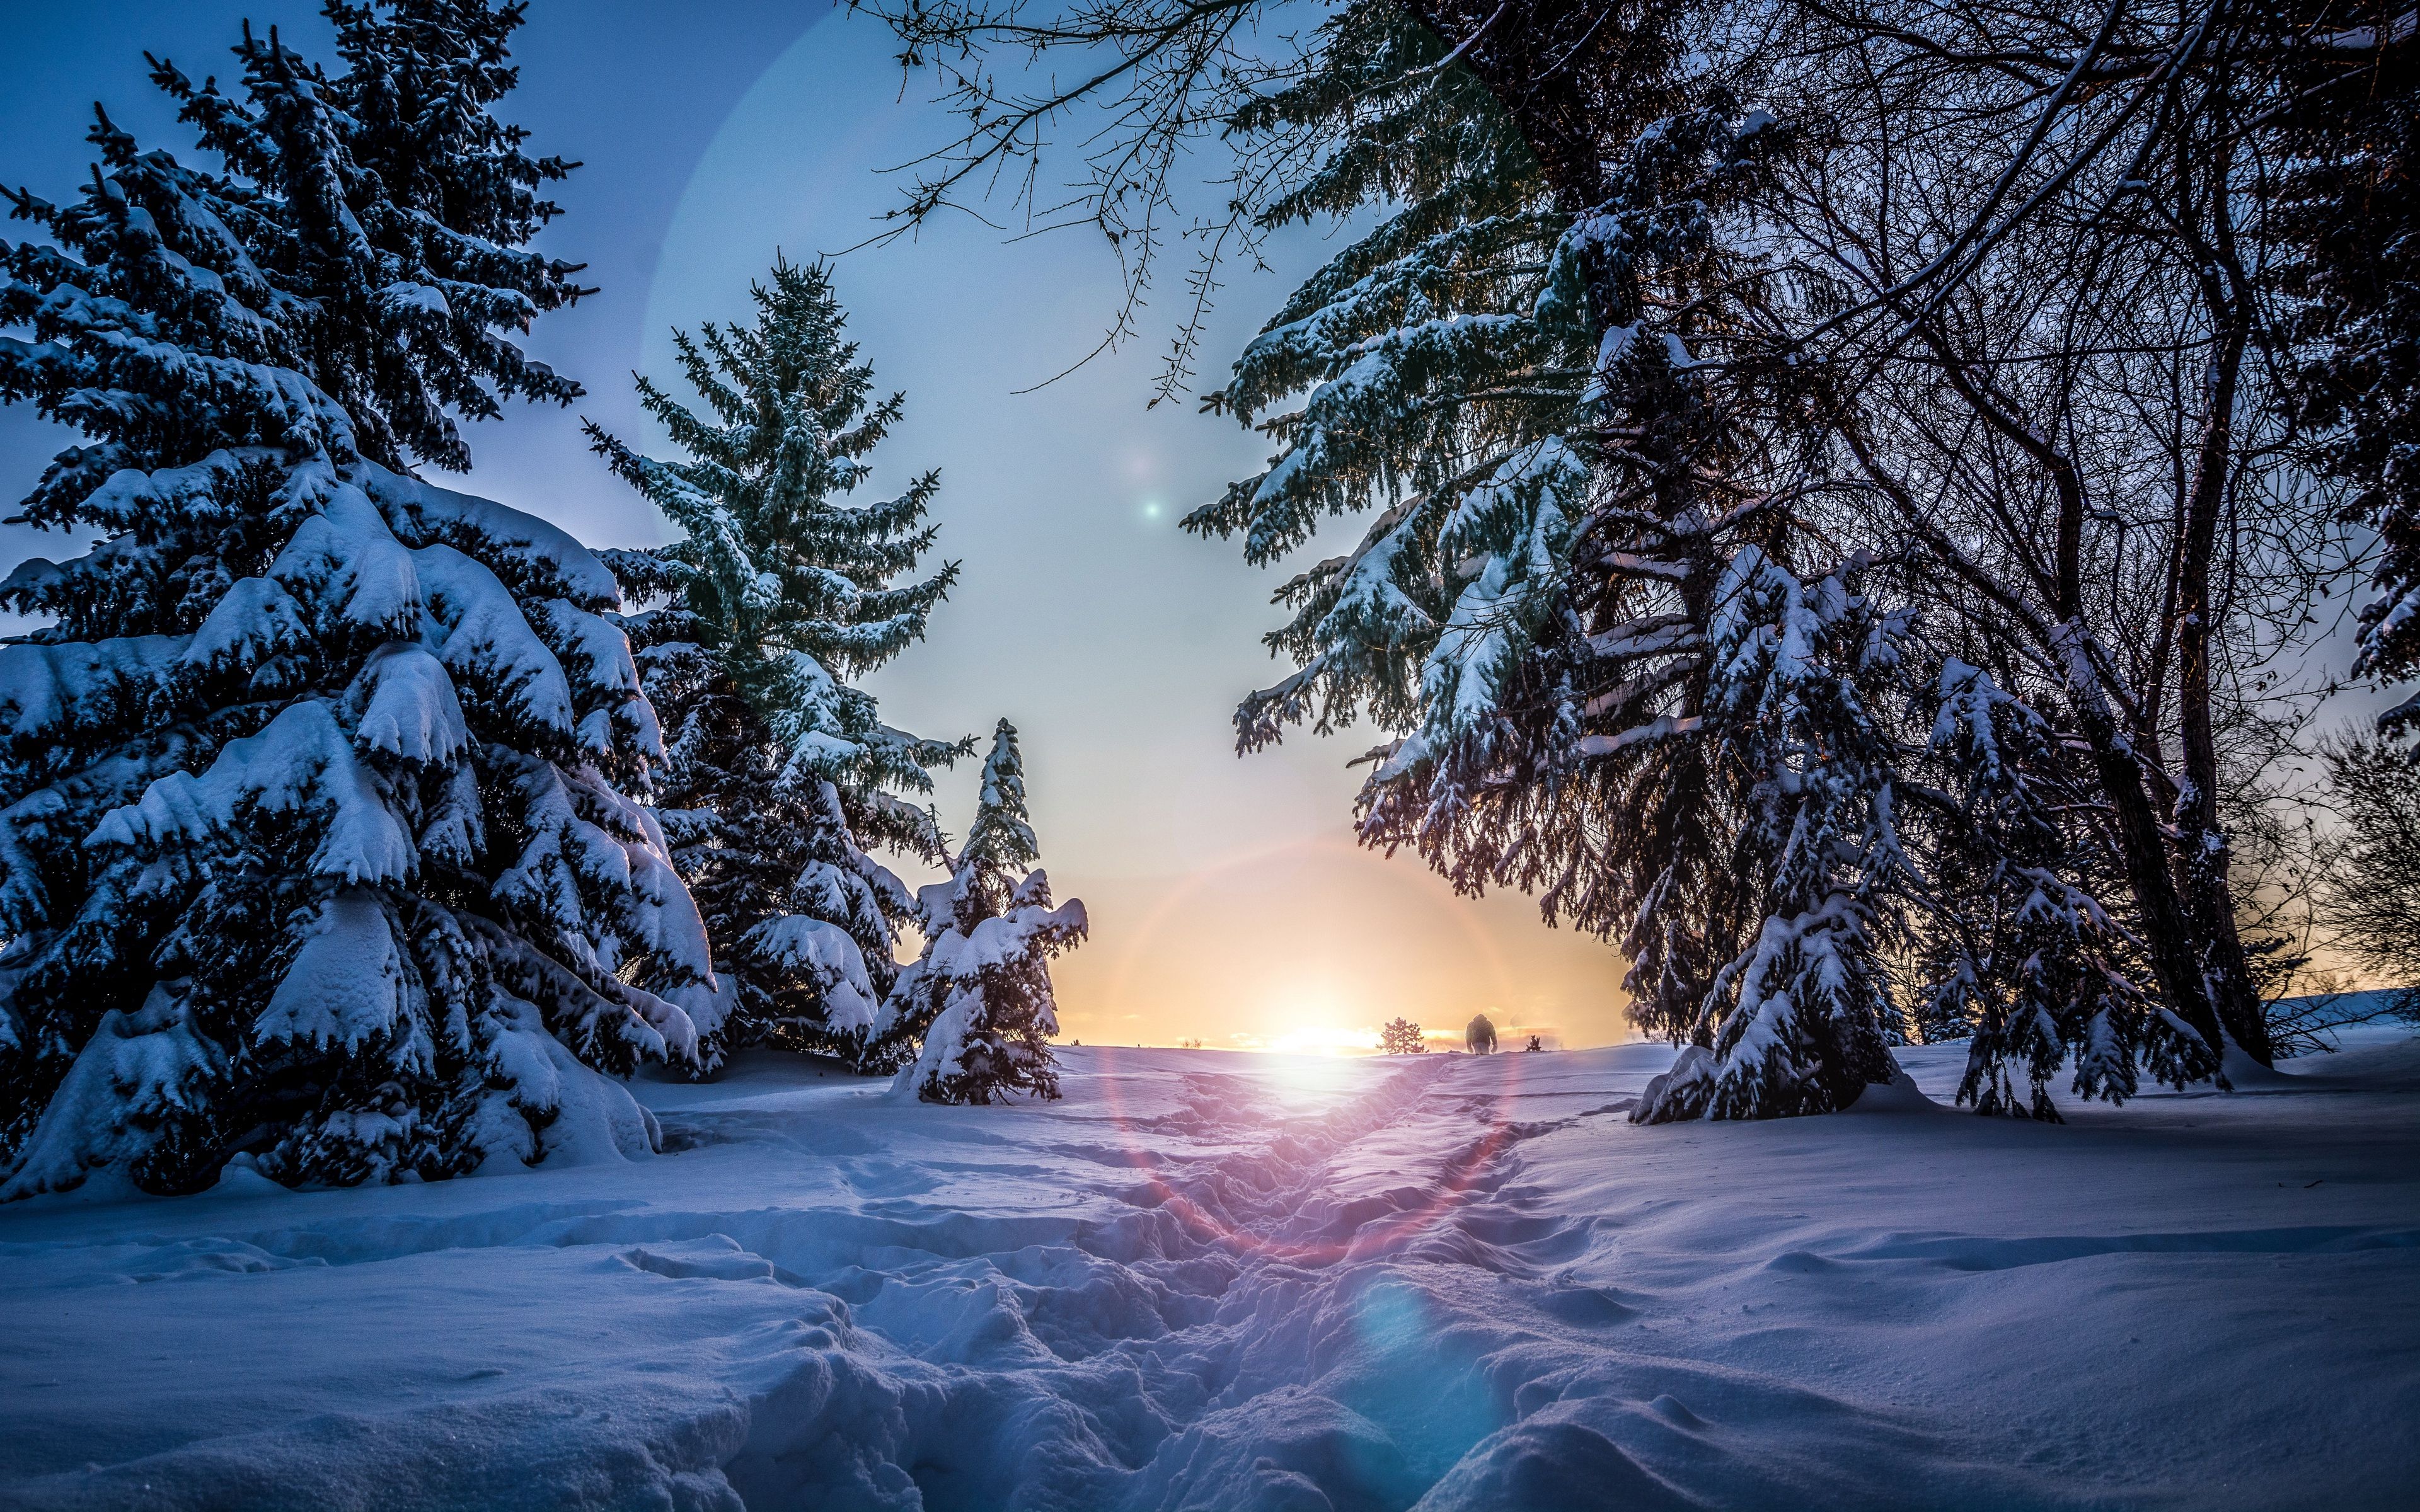 Footprints in the snow in a snowy forest at sunrise wallpaper and image, picture, photo